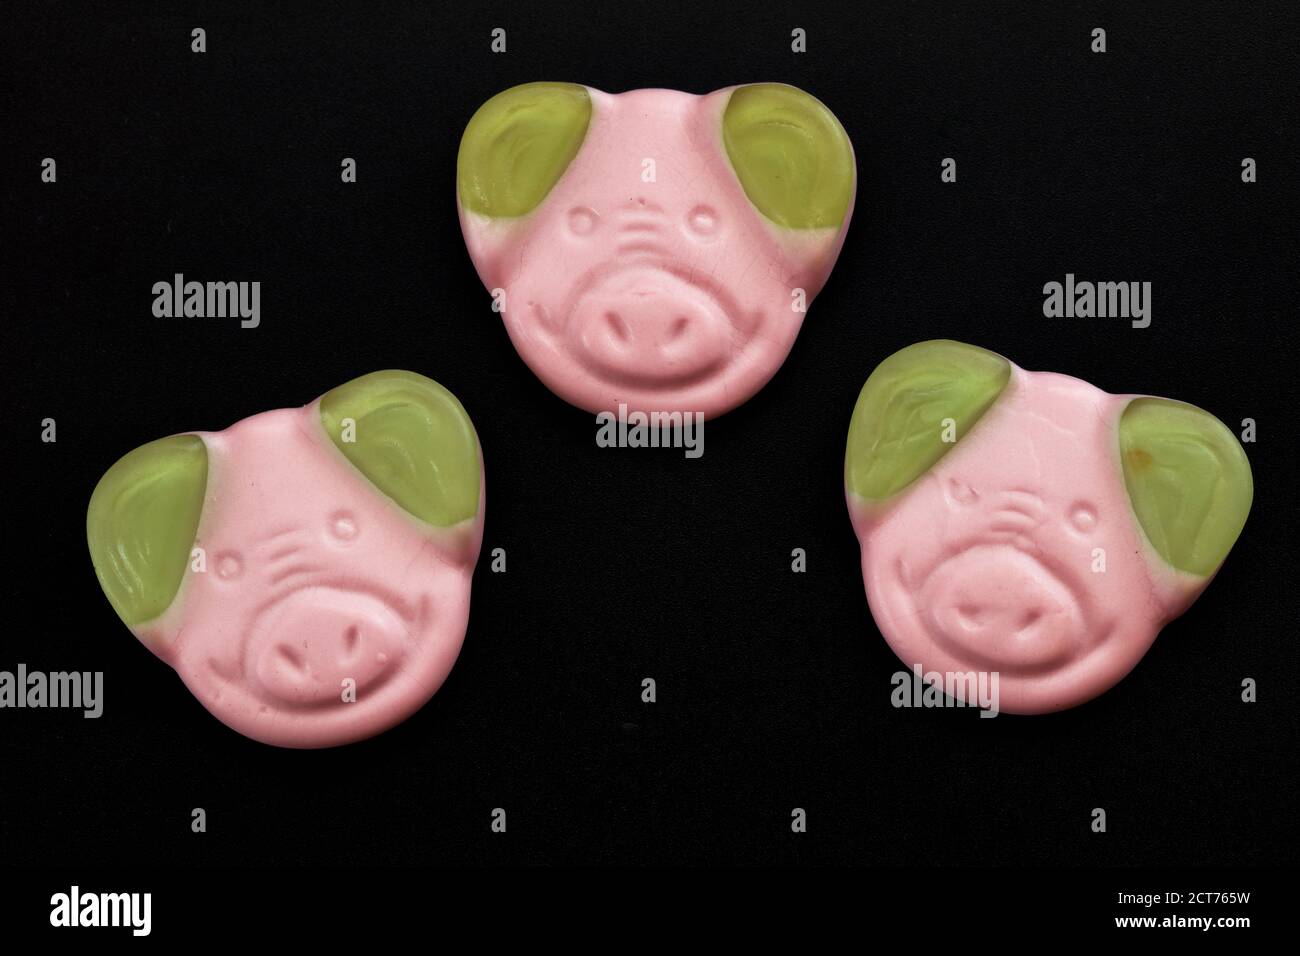 Percy Pig sweets Stock Photo